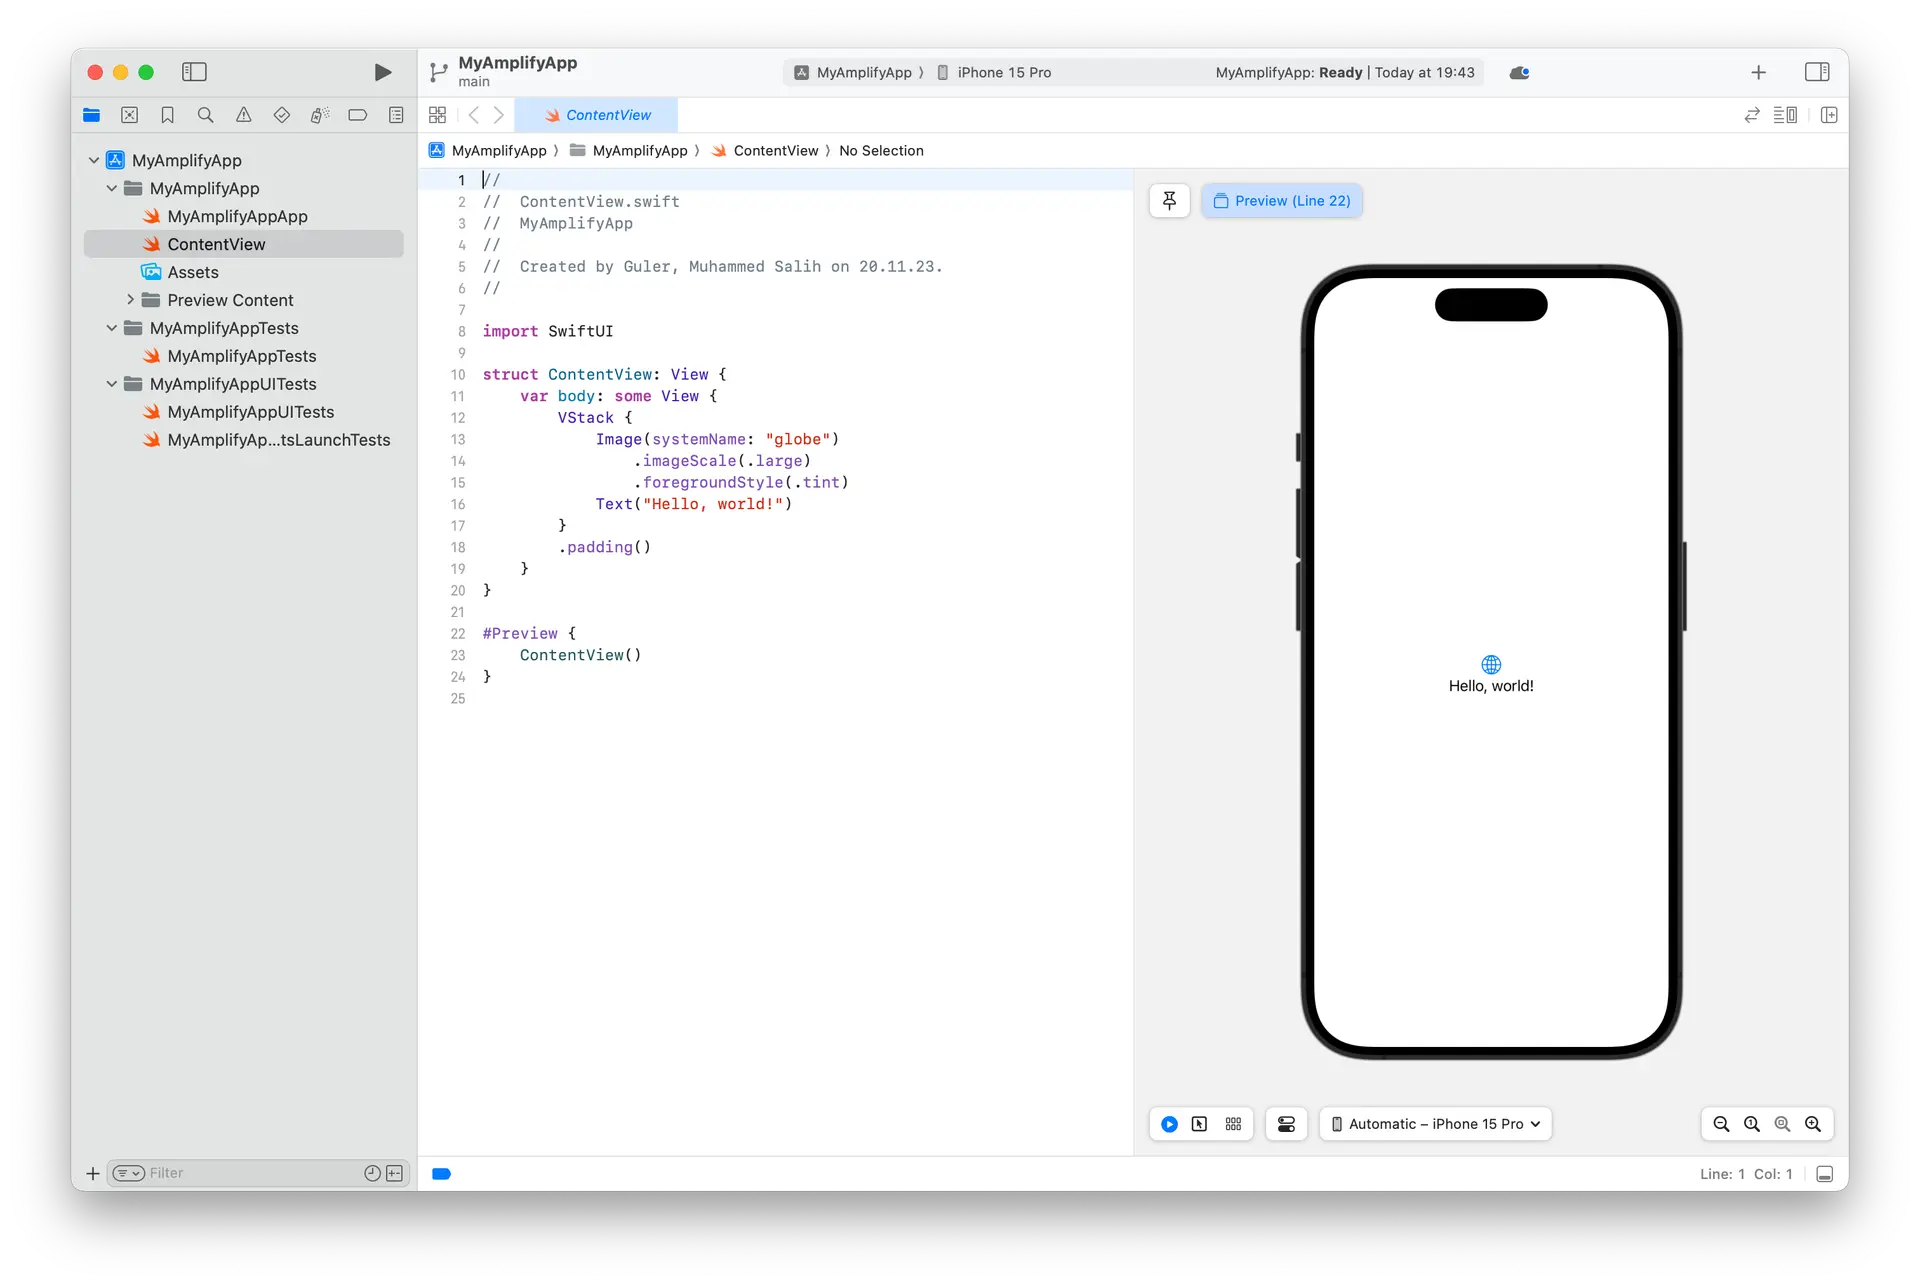 Shows the base project for SwiftUI